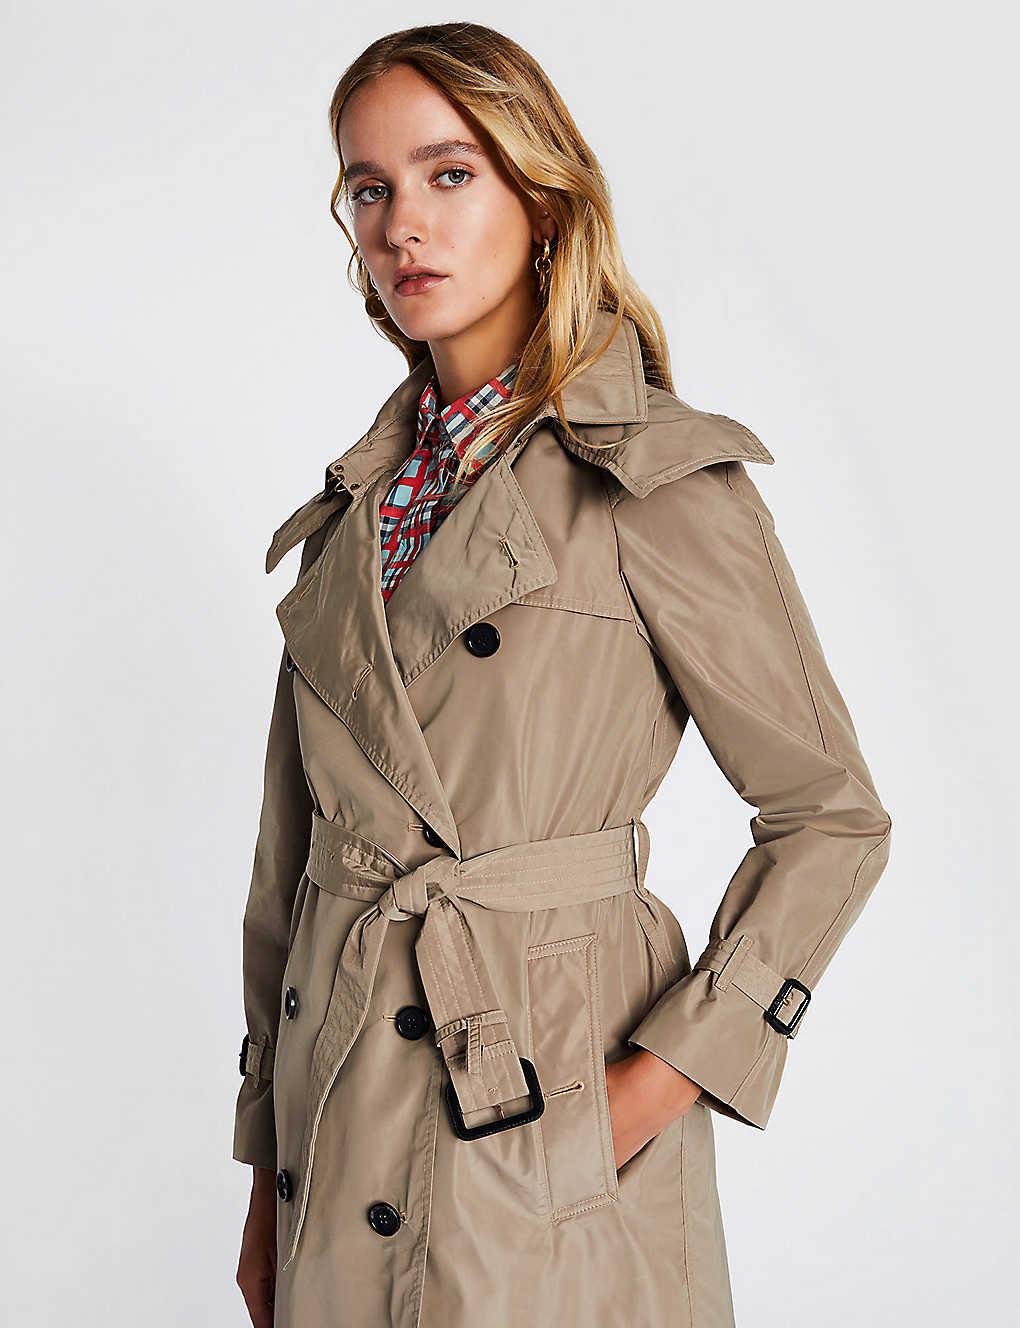 Amberford Cotton Trench Coat Hotsell, 55% OFF | mooving.com.uy